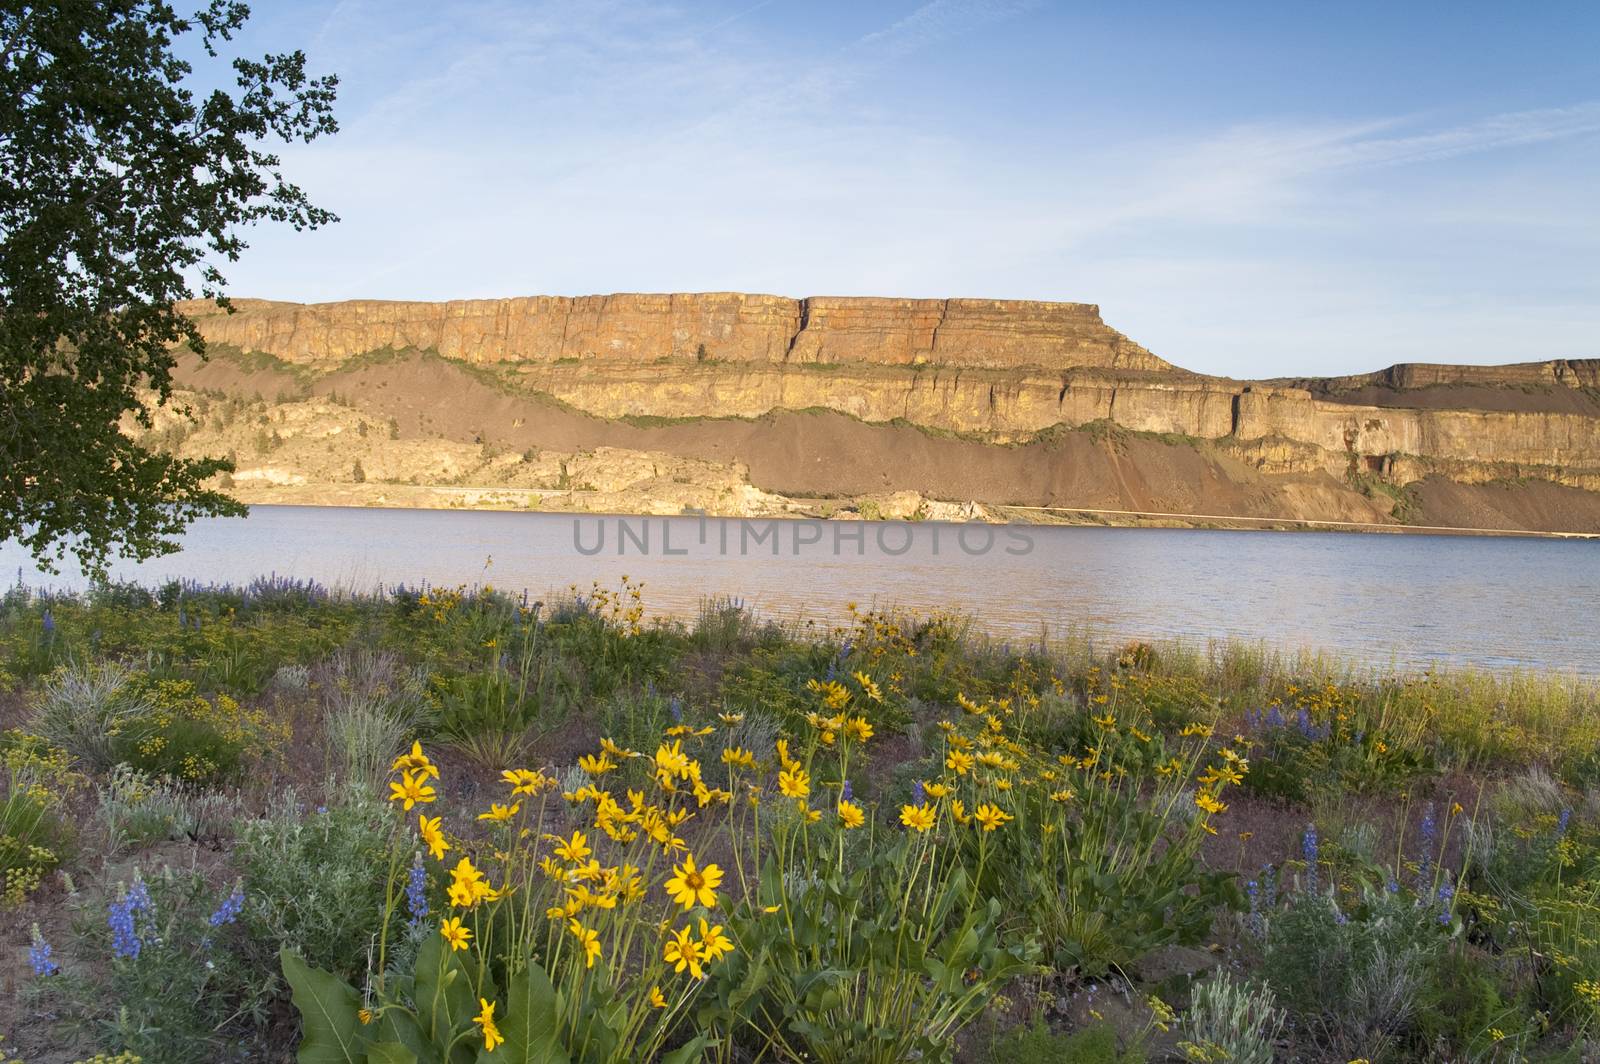 Flowers somehow grow out of the dry ground in Eastern Washington